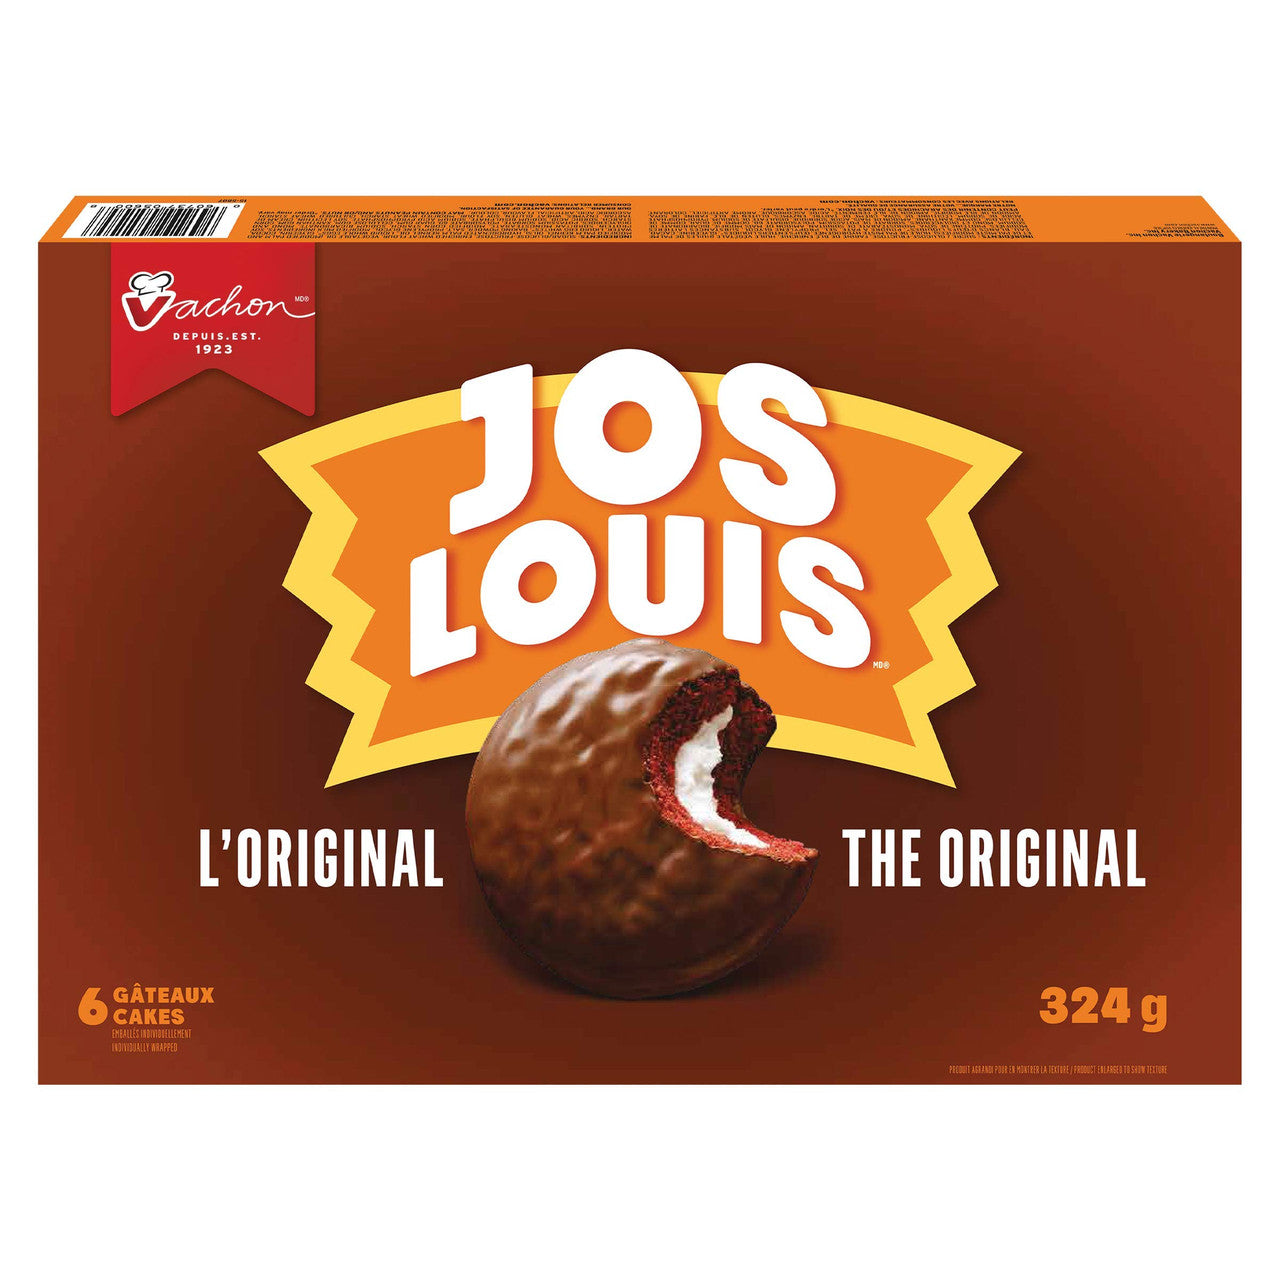 Vachon Jos Louis the Original, 6-delicious Sponge Cake with Vanilla-flavoured Creme Filling, 324g/11.4 Oz Box (Imported from Canada}